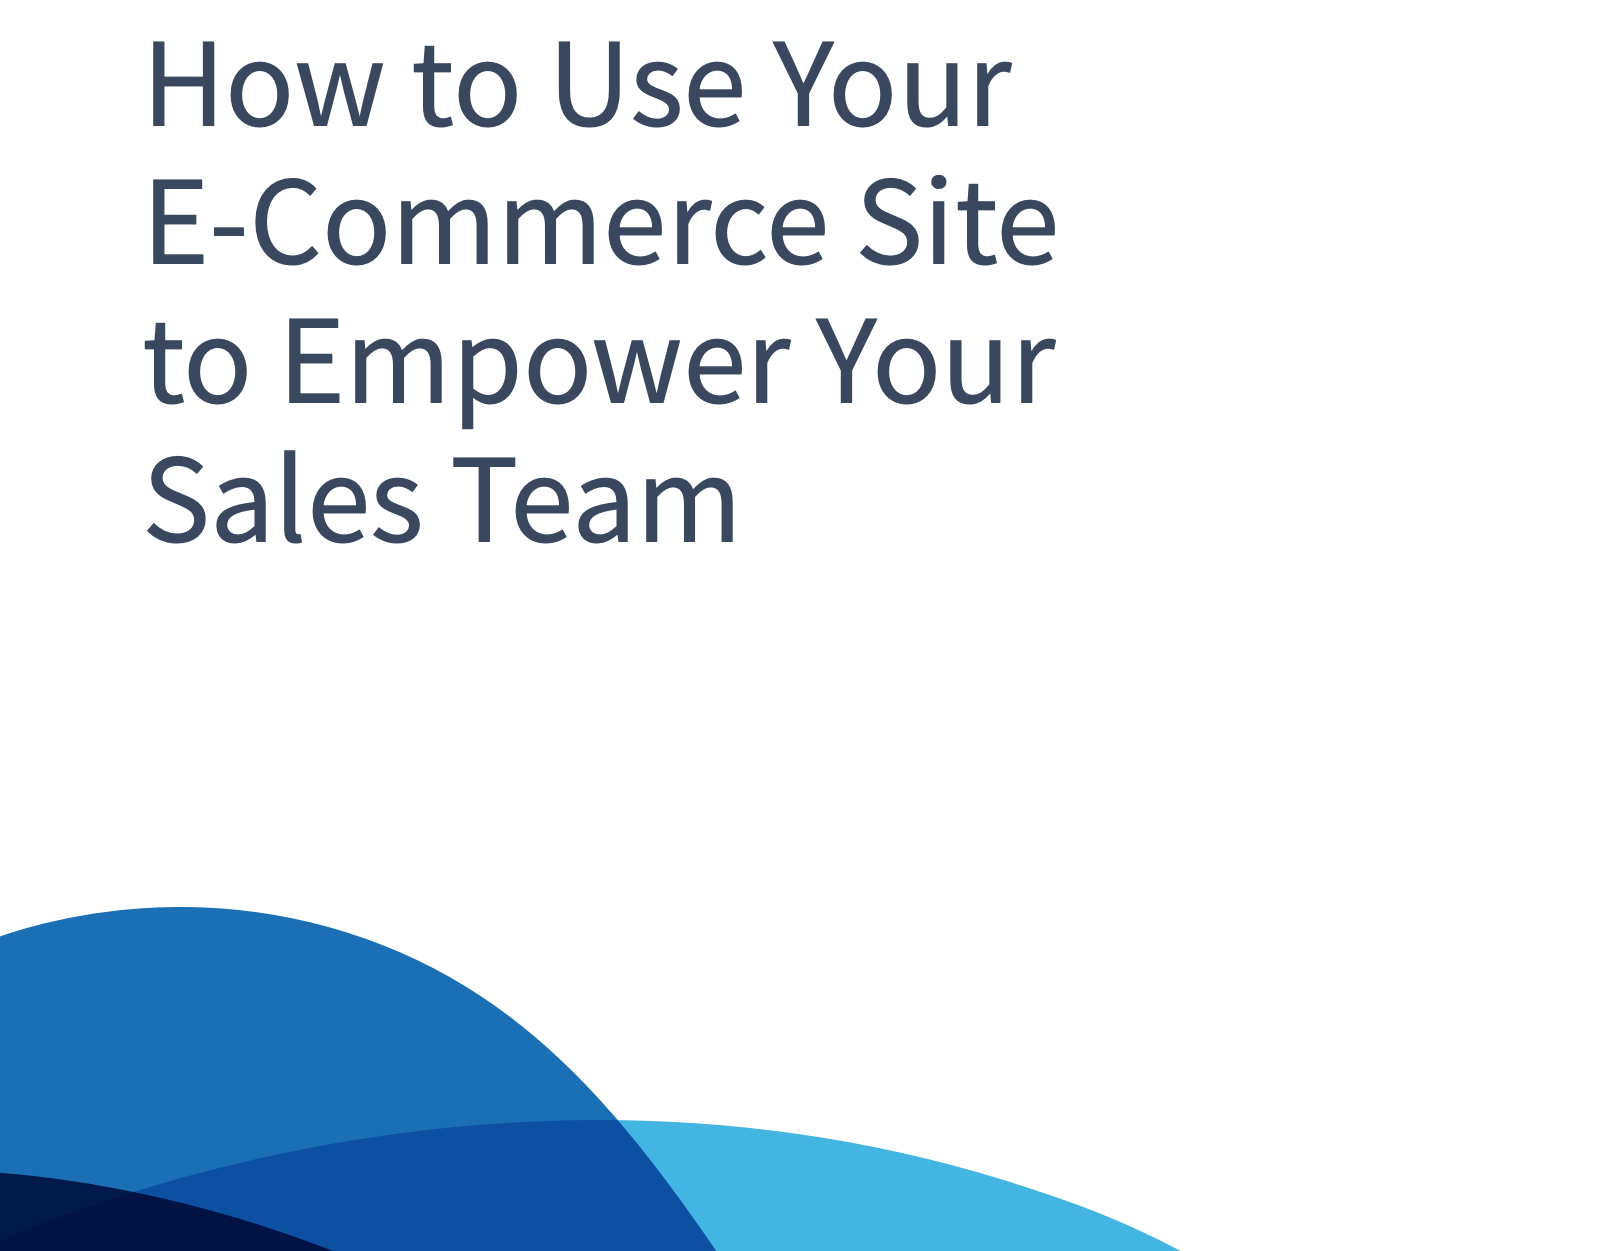 Use Your E-Commerce Site to Empower Your Sales Team